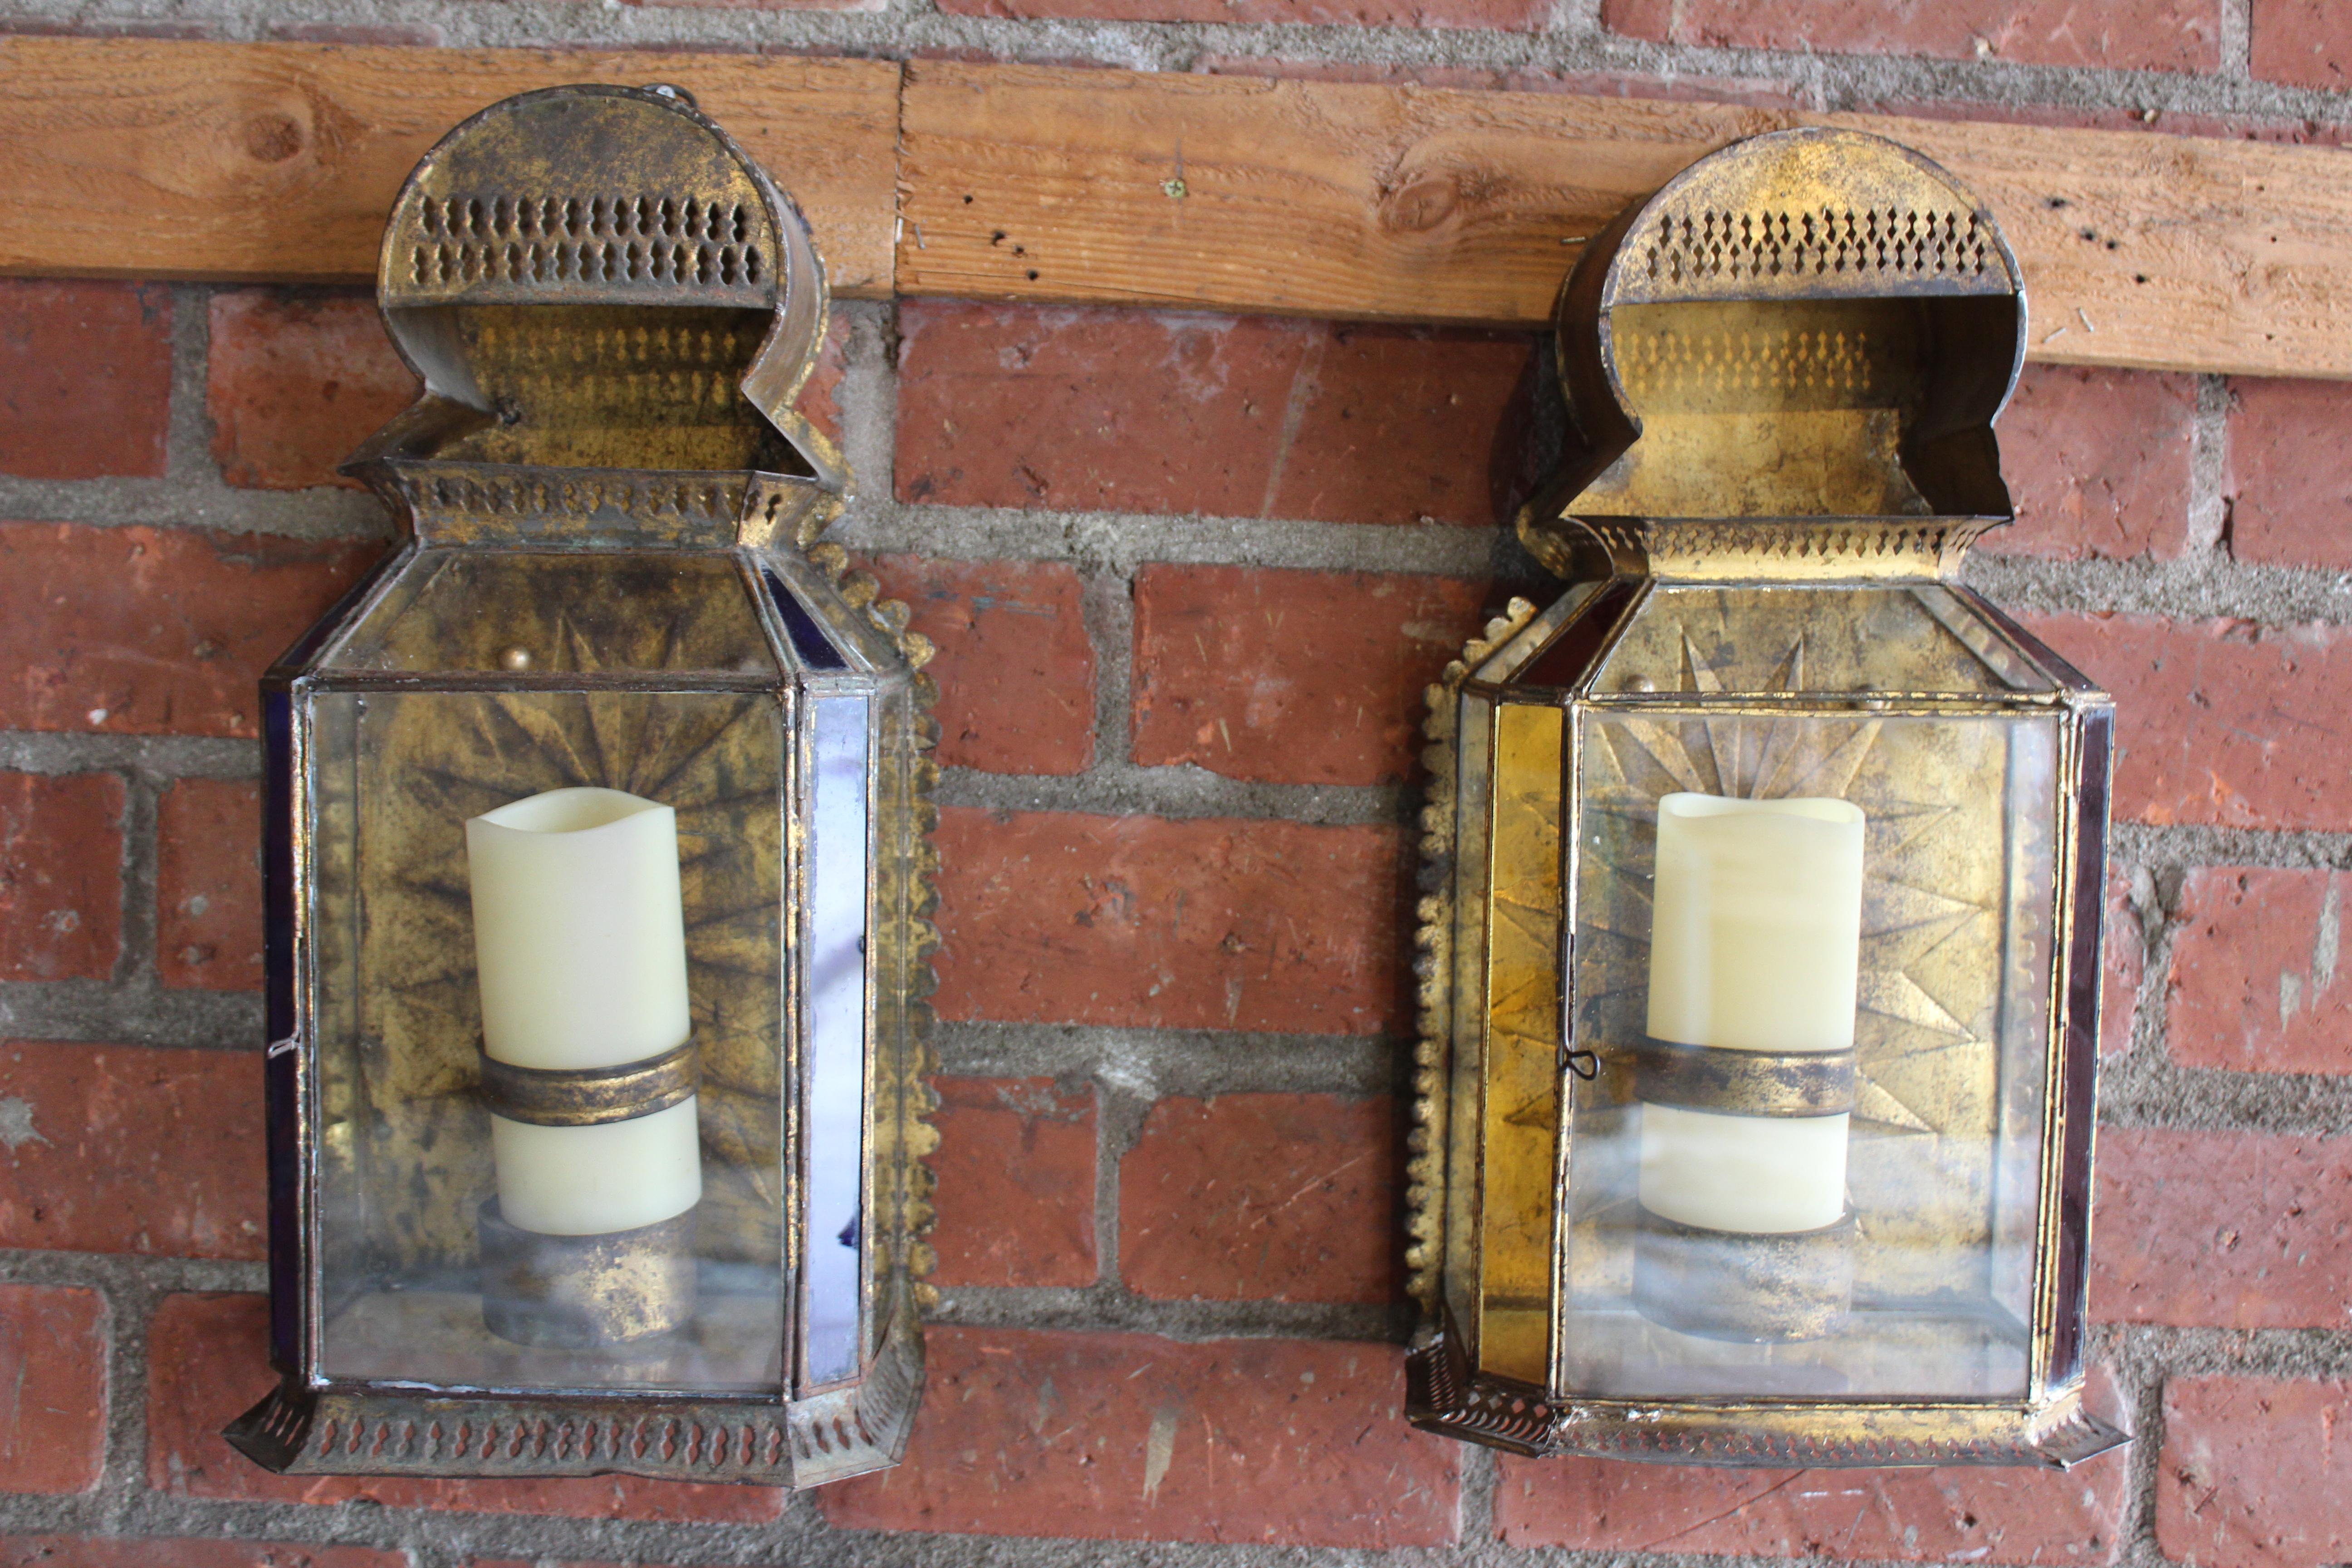 Pair of antique gilt metal Moroccan Moorish style wall sconces. The pair have been professionally rewired and restored. They include resin candle covers that resemble wax. They are ready for installation. They both have glass faceted fronts and